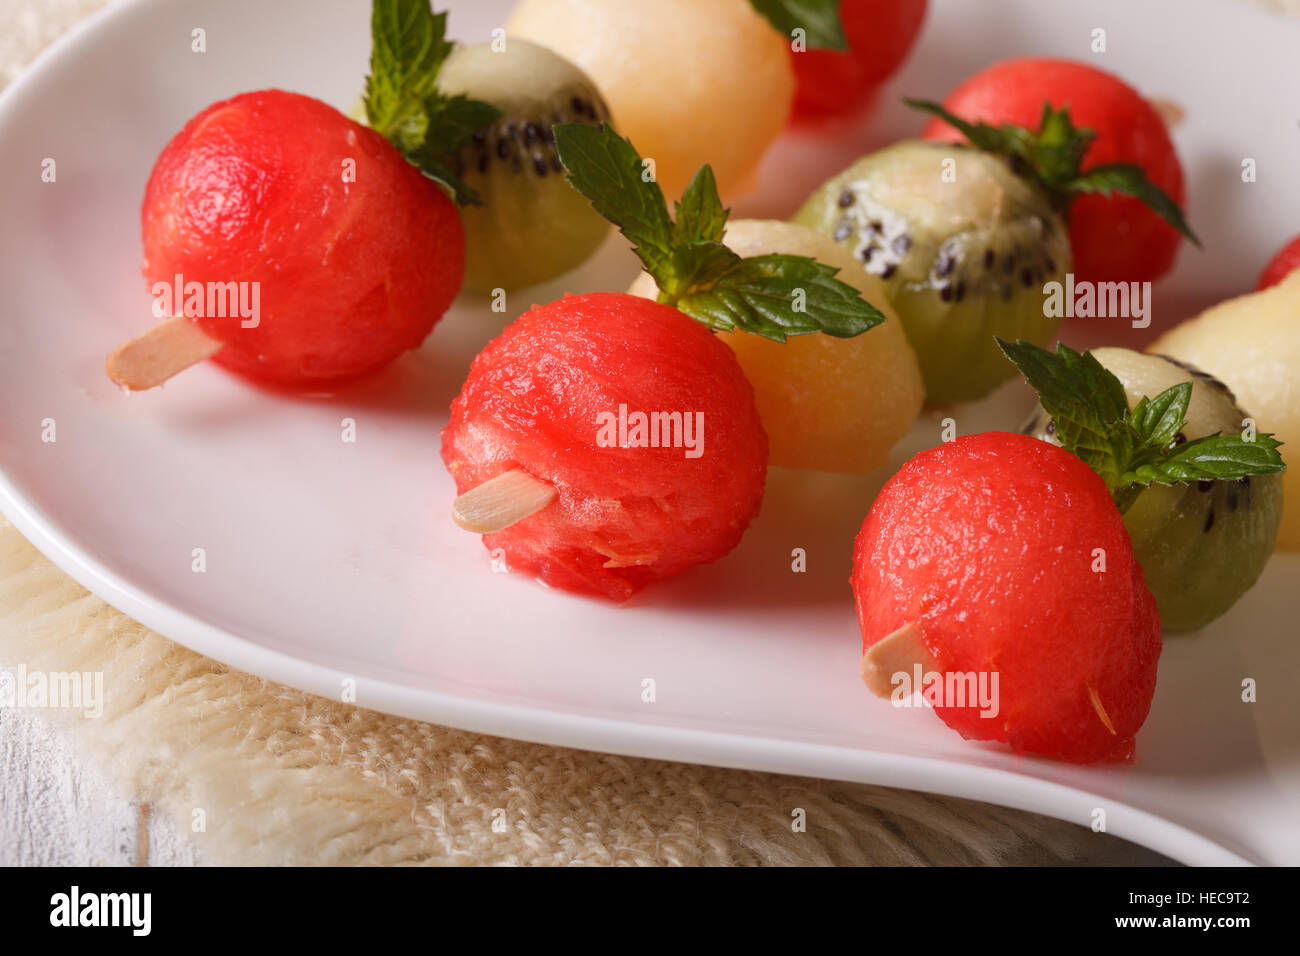 Balls of watermelon, kiwi and melon on skewers close-up on a plate. horizontal Stock Photo